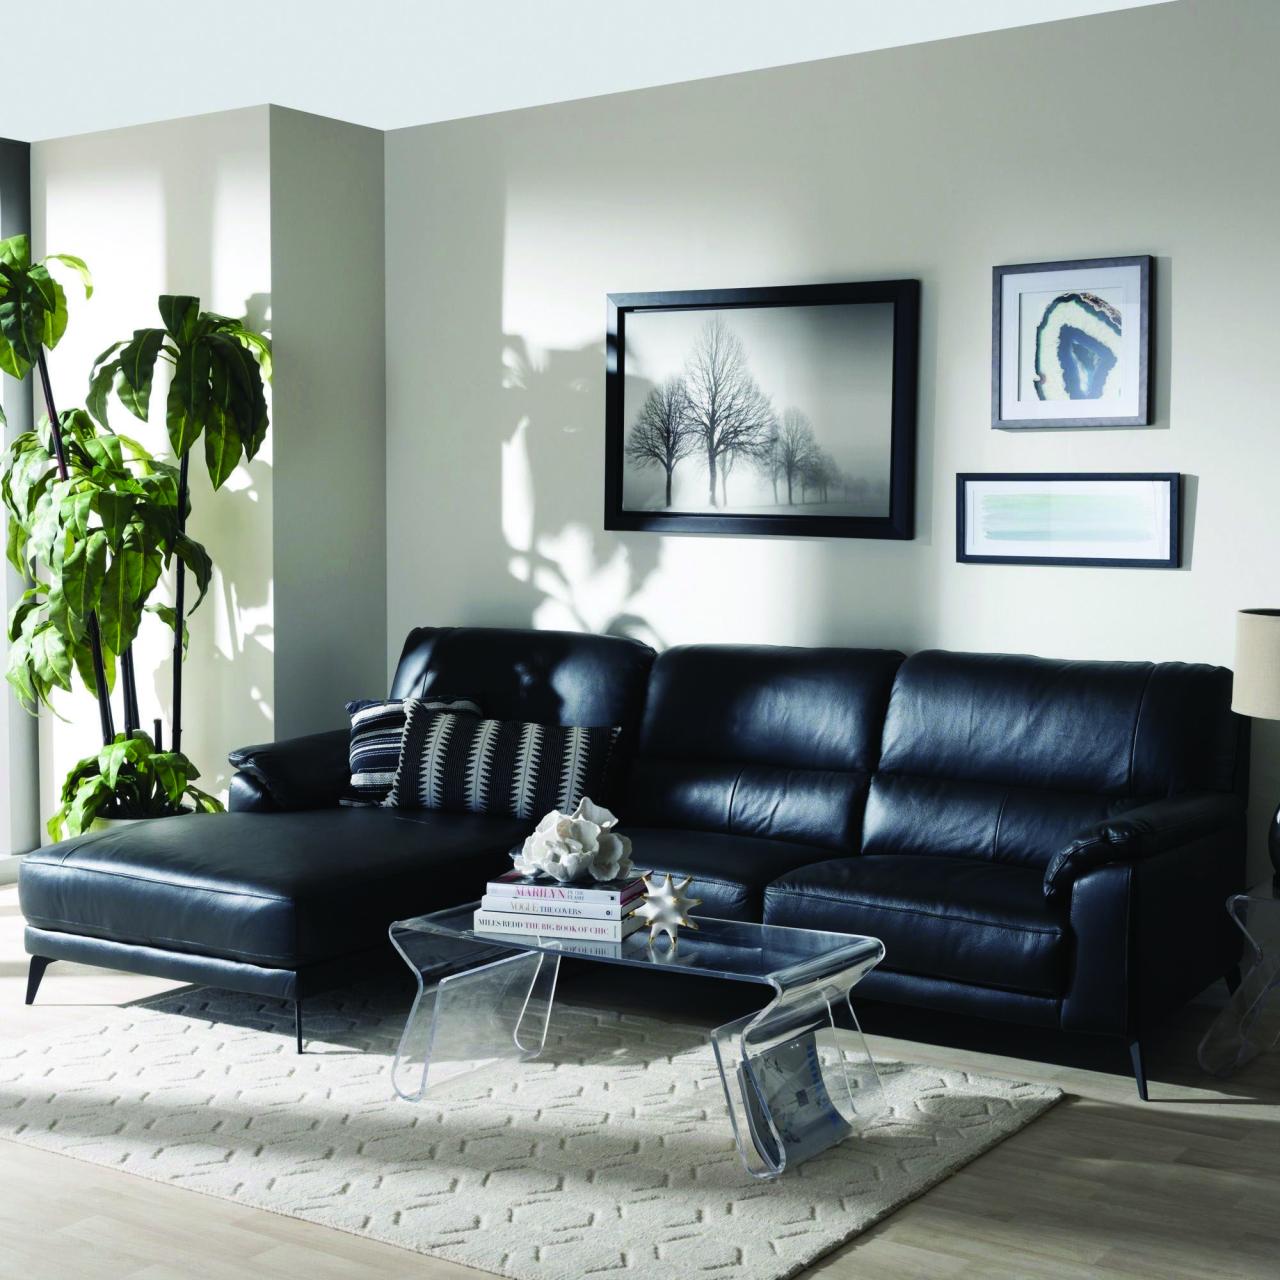 Living Room With Black Sofa